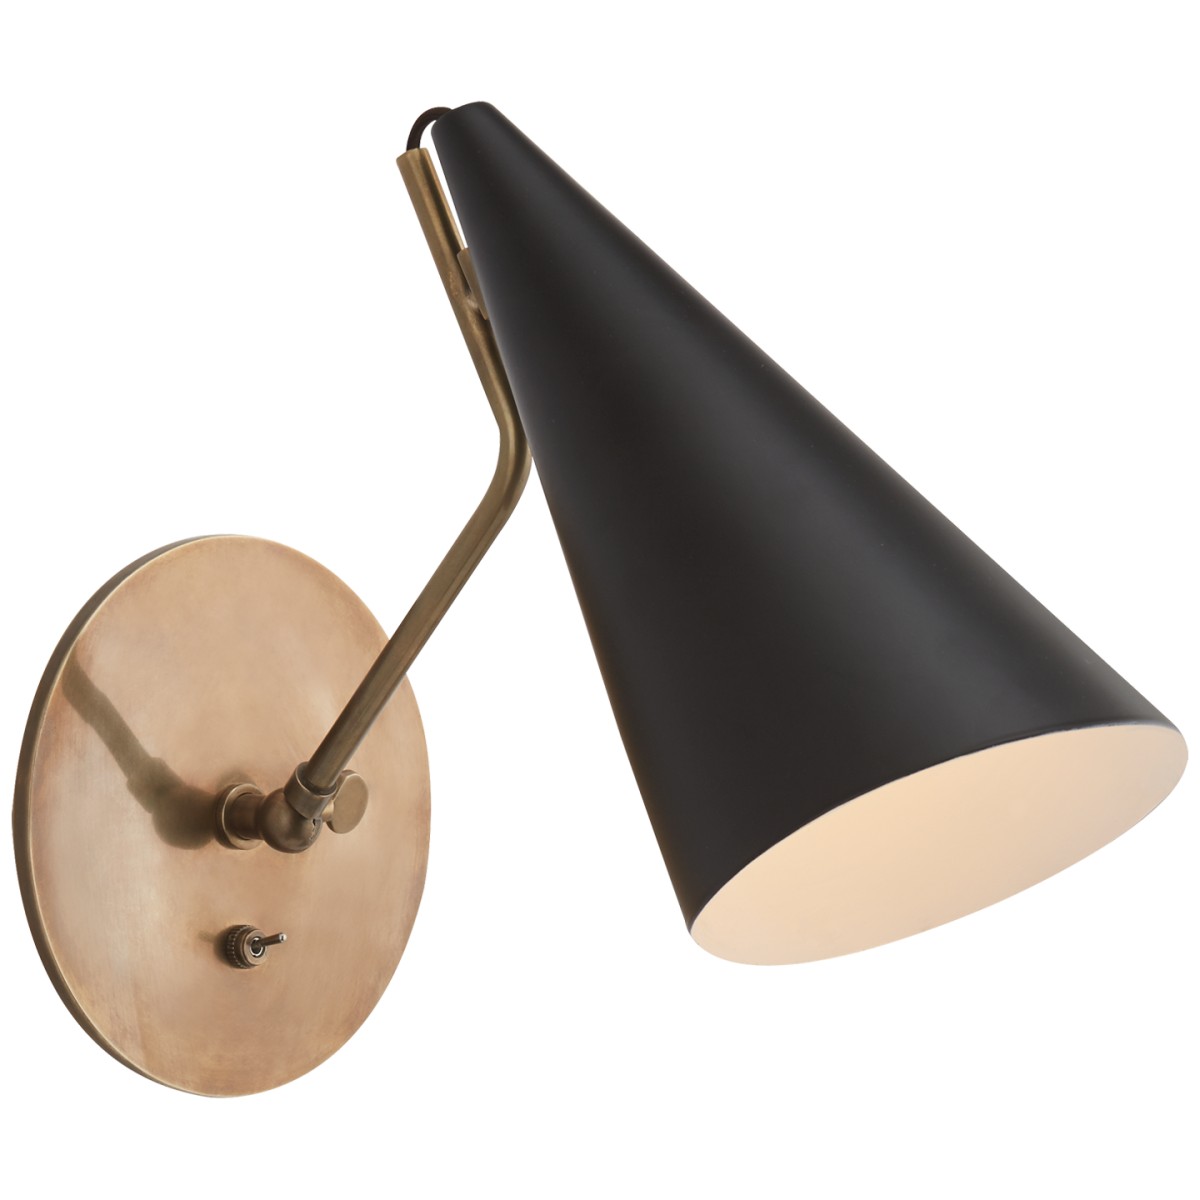 Clemente Wall Light in Hand-Rubbed Antique Brass